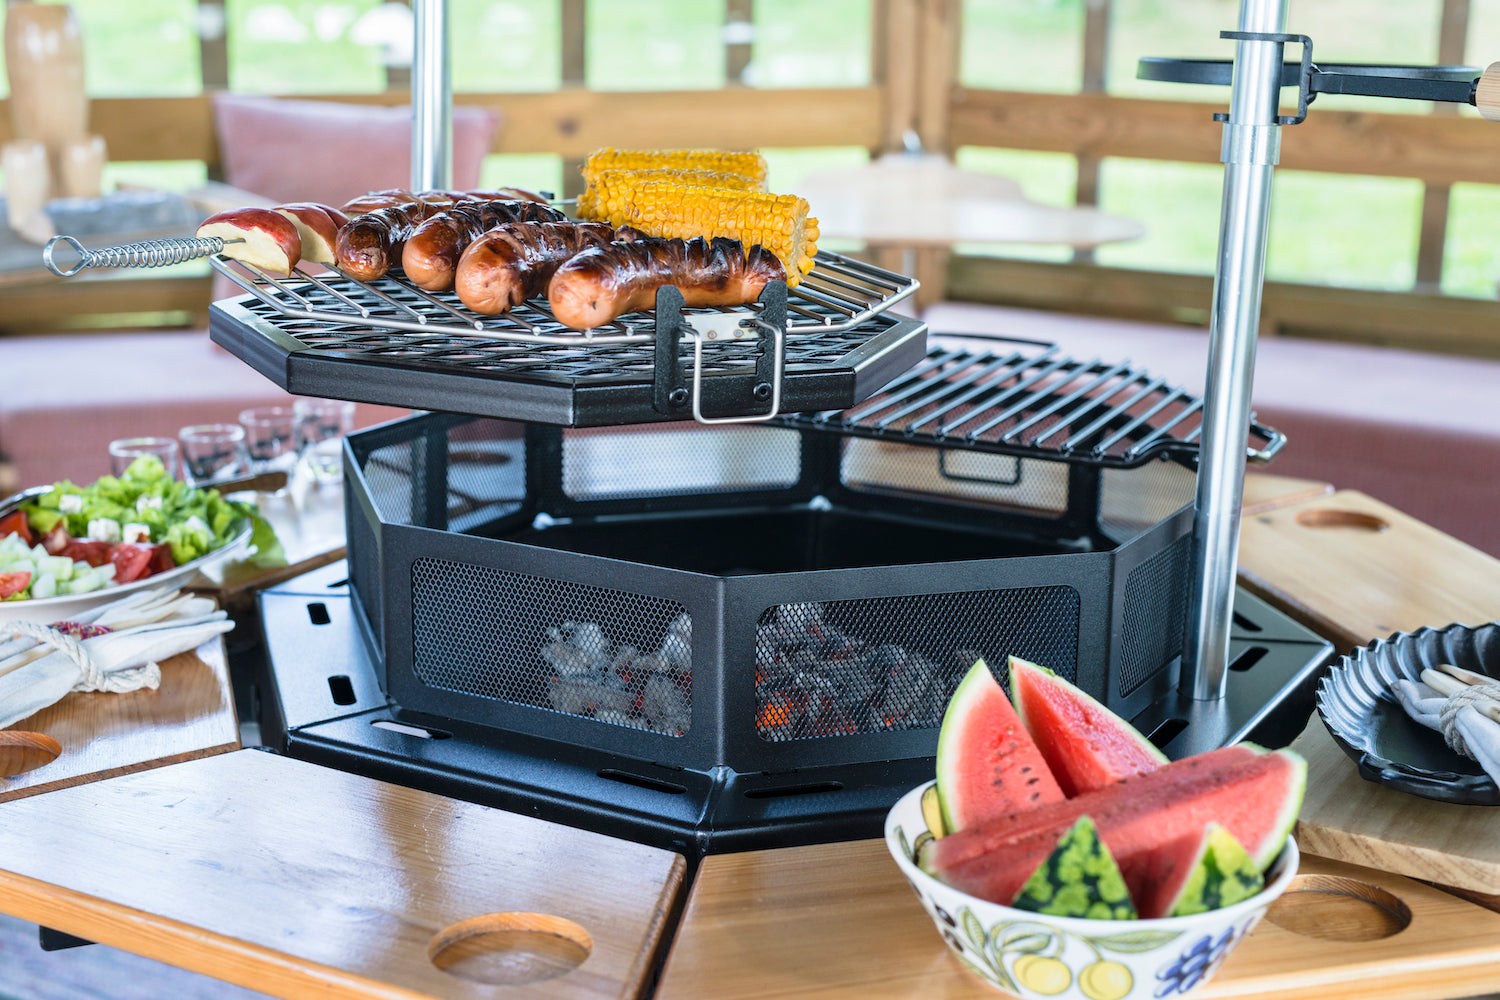    Sausage and corn sitting on the Rotating Grill accessory attached to the Kota Grill. Watermelon sits in a bowl on one of the tables attached to the grill.    